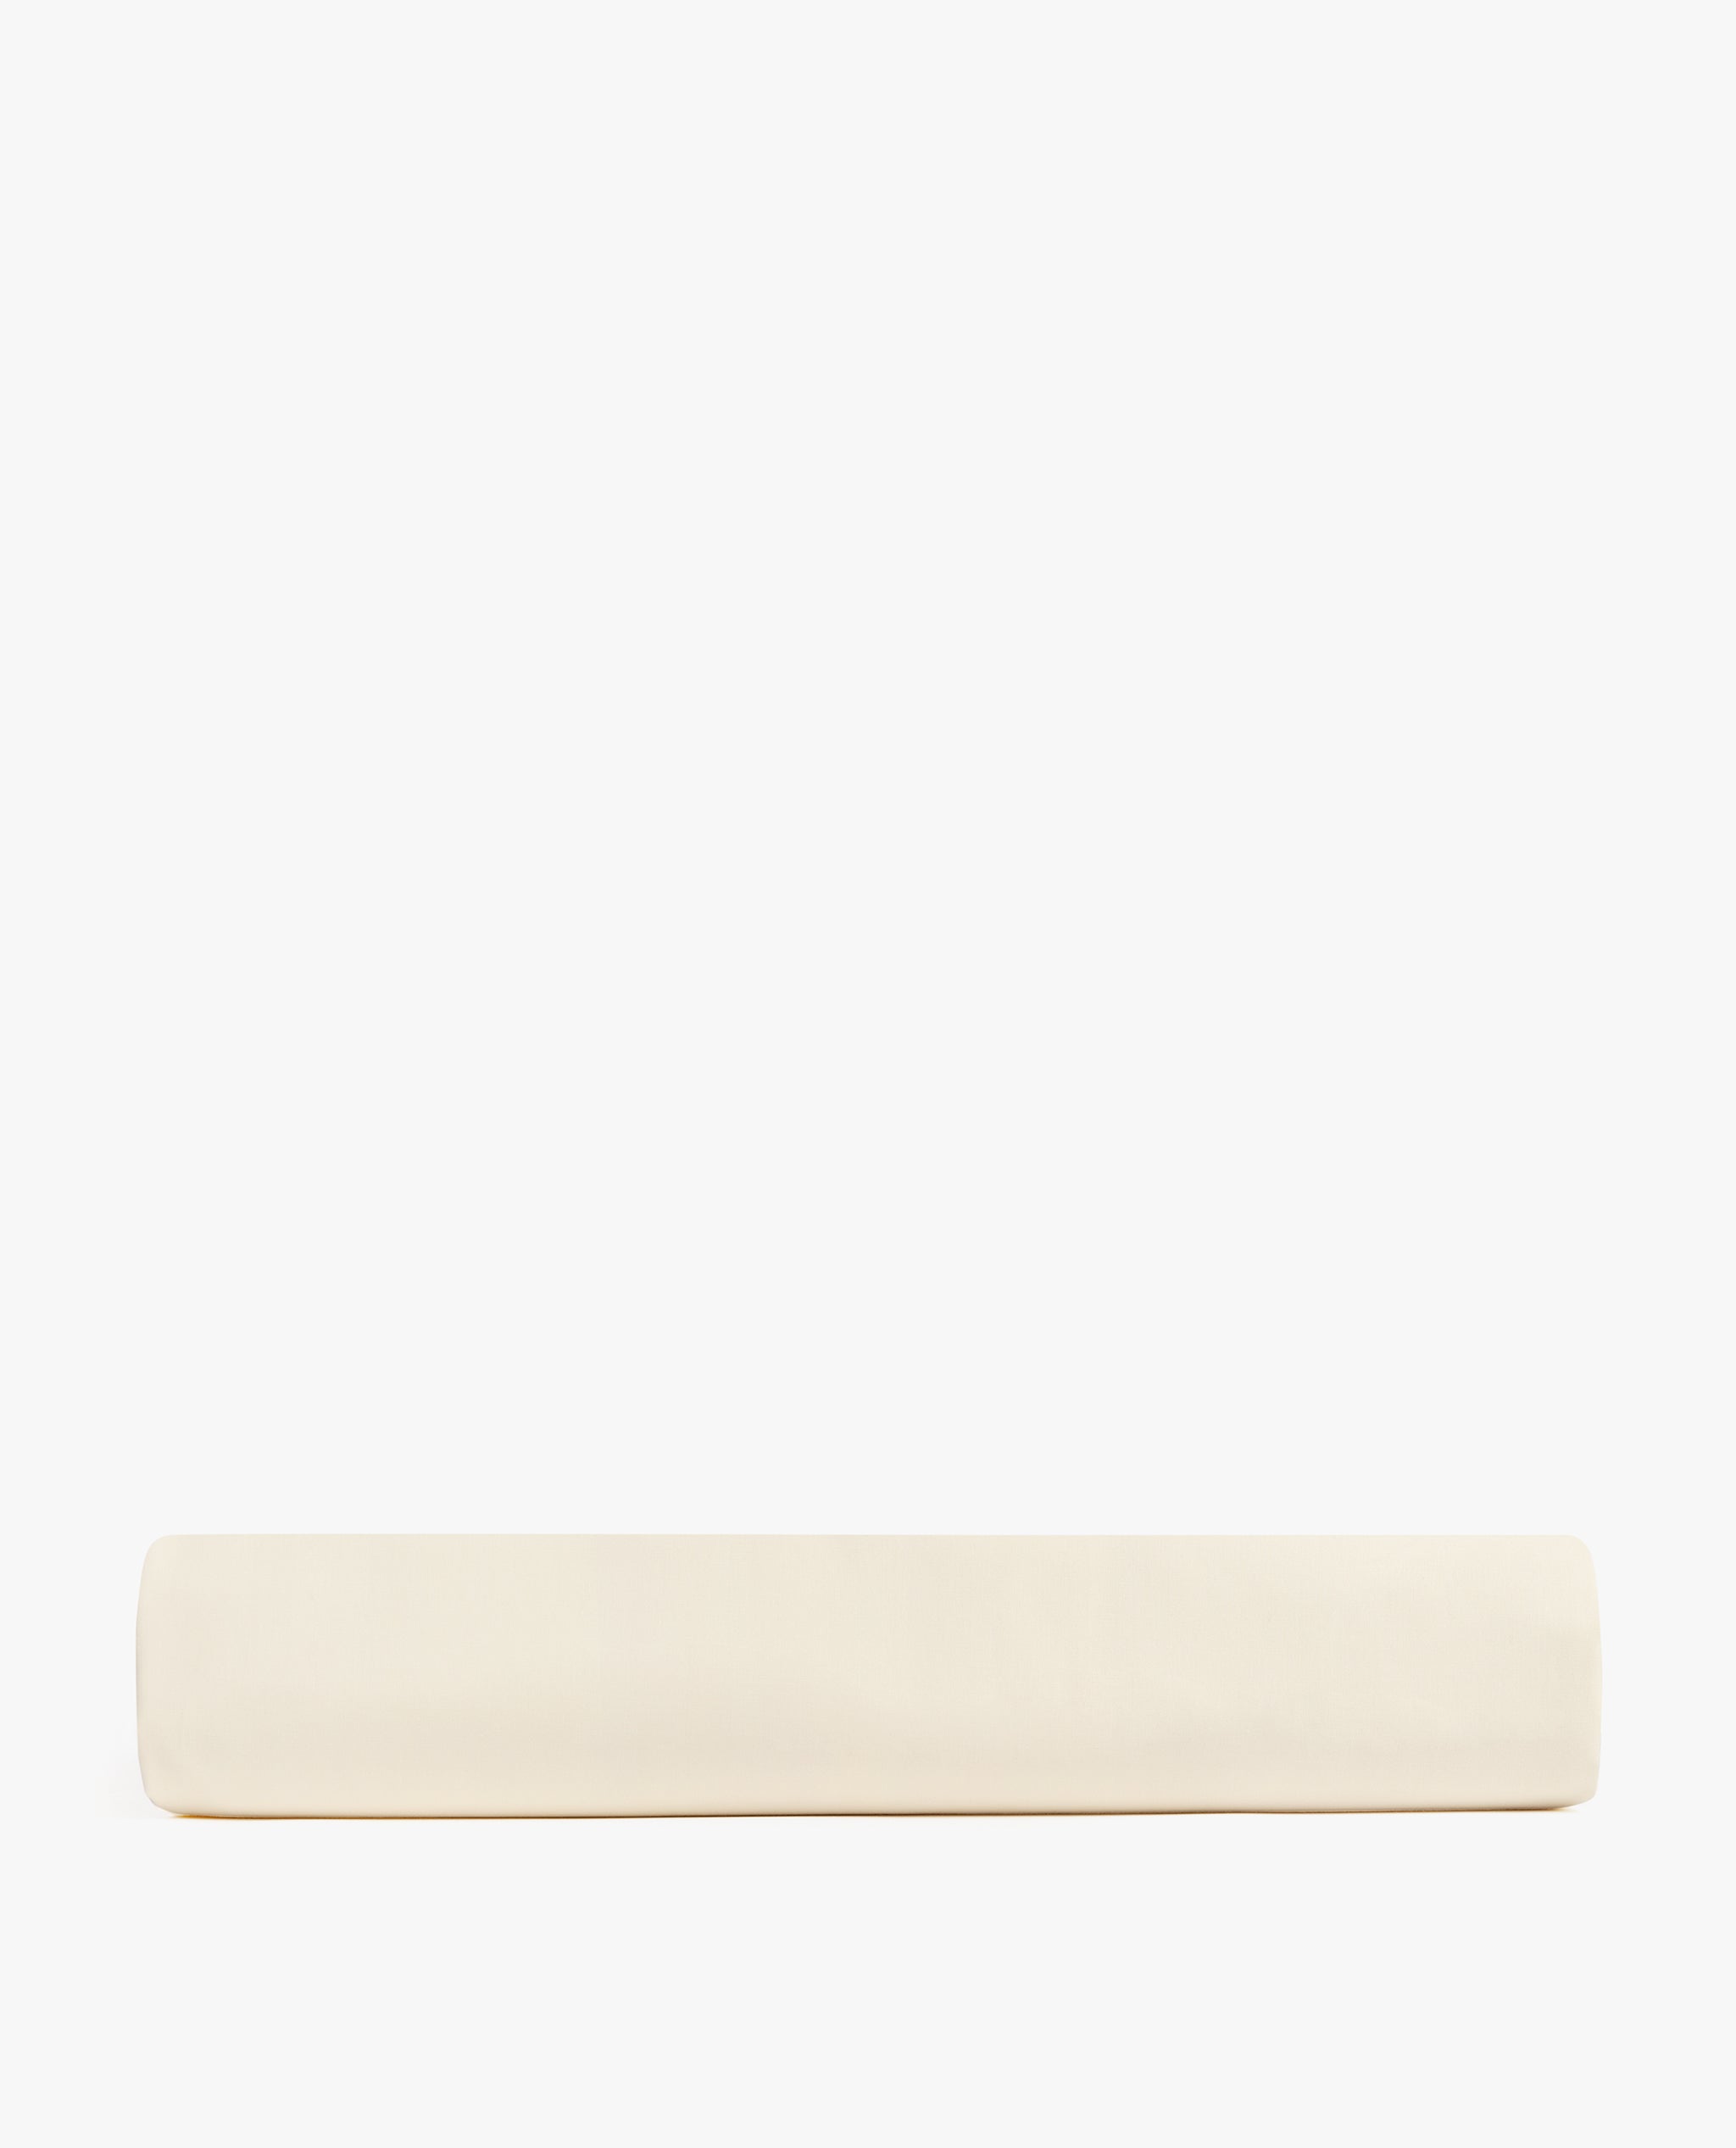 The Crisp & Cool Organic Luxury Fitted Sheet